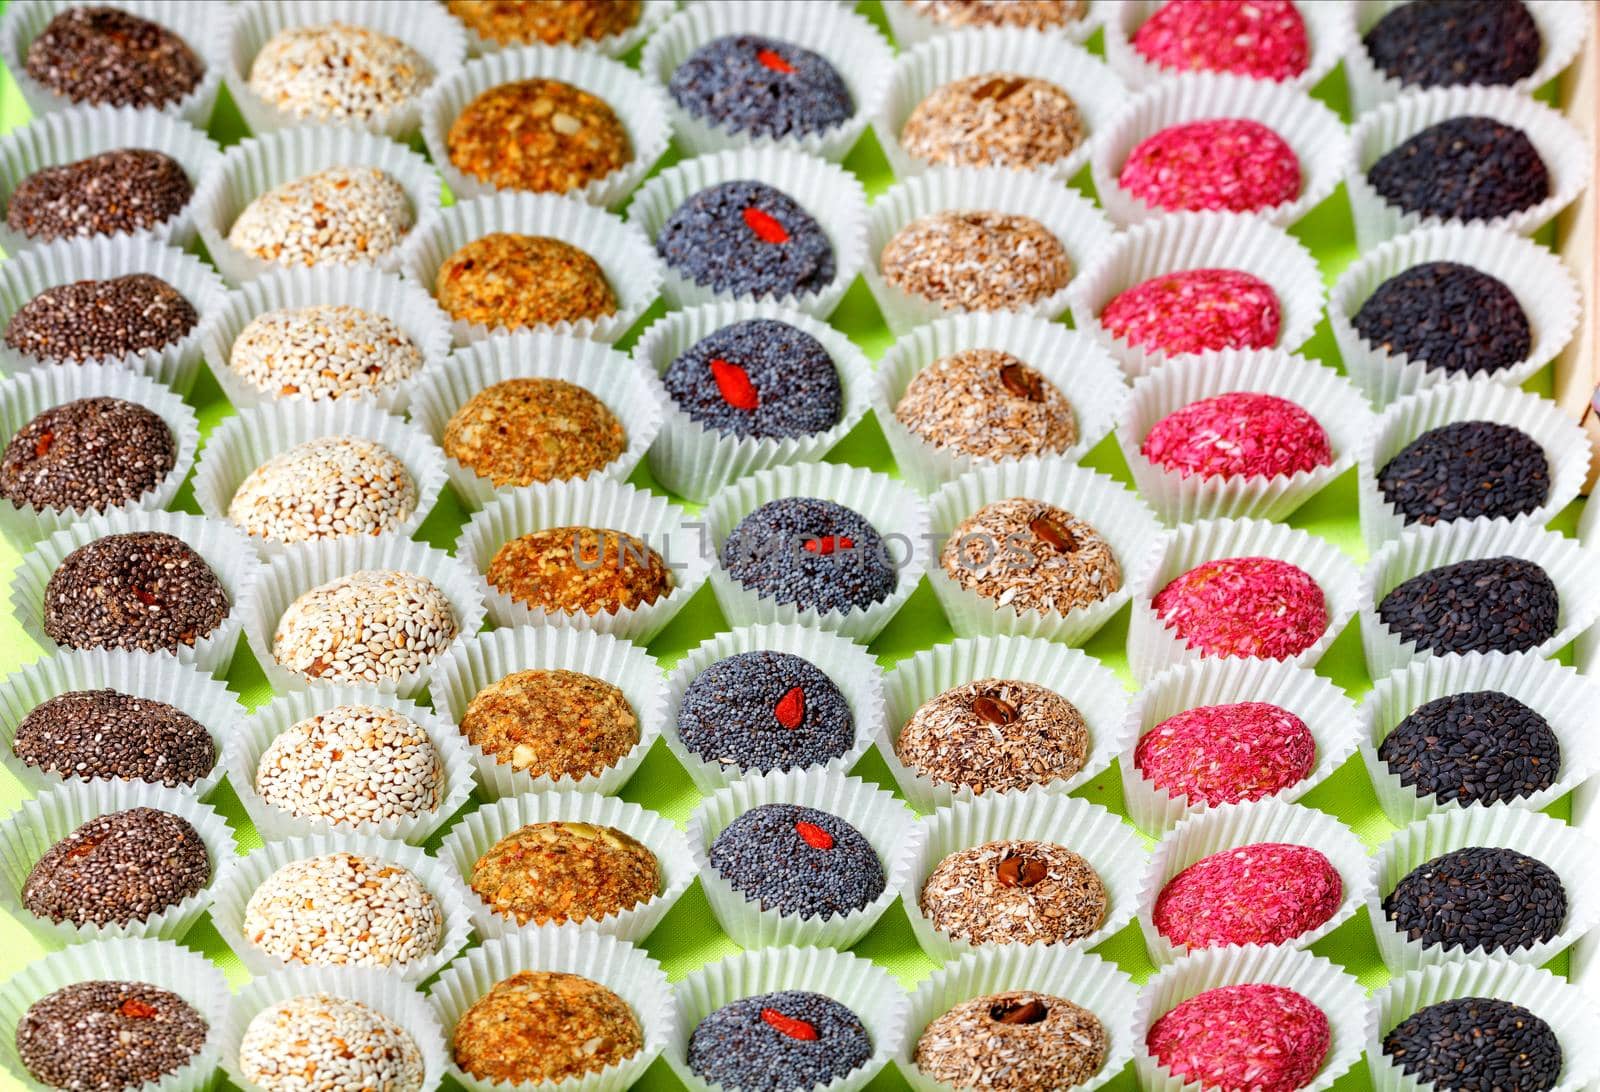 A collection of handmade energy balls with various seed fillings in paper baskets, arranged in even rows. Healthy dessert and appetizer on a bright light green background.